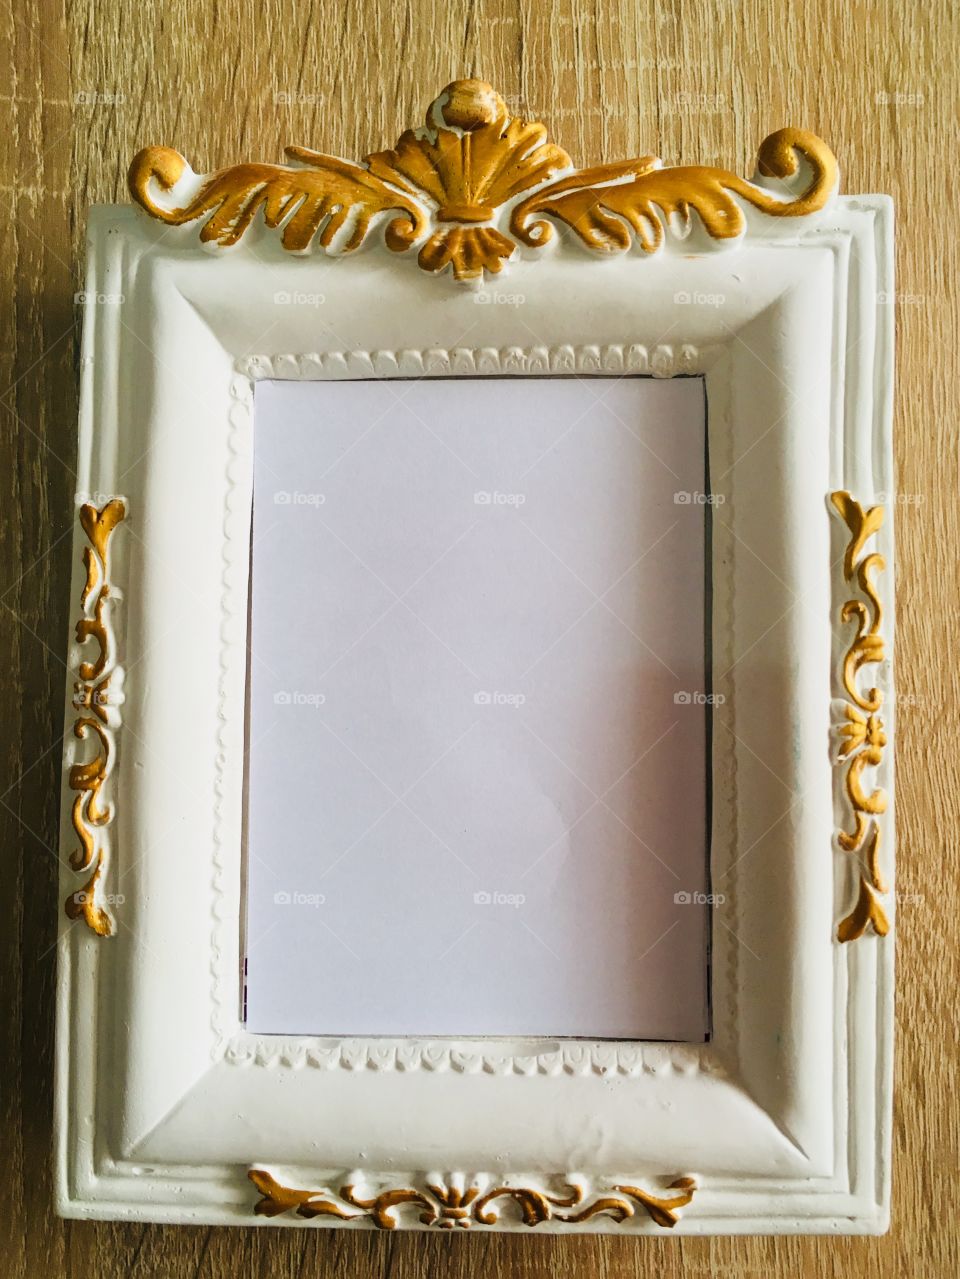 Black photo frame on wooden table